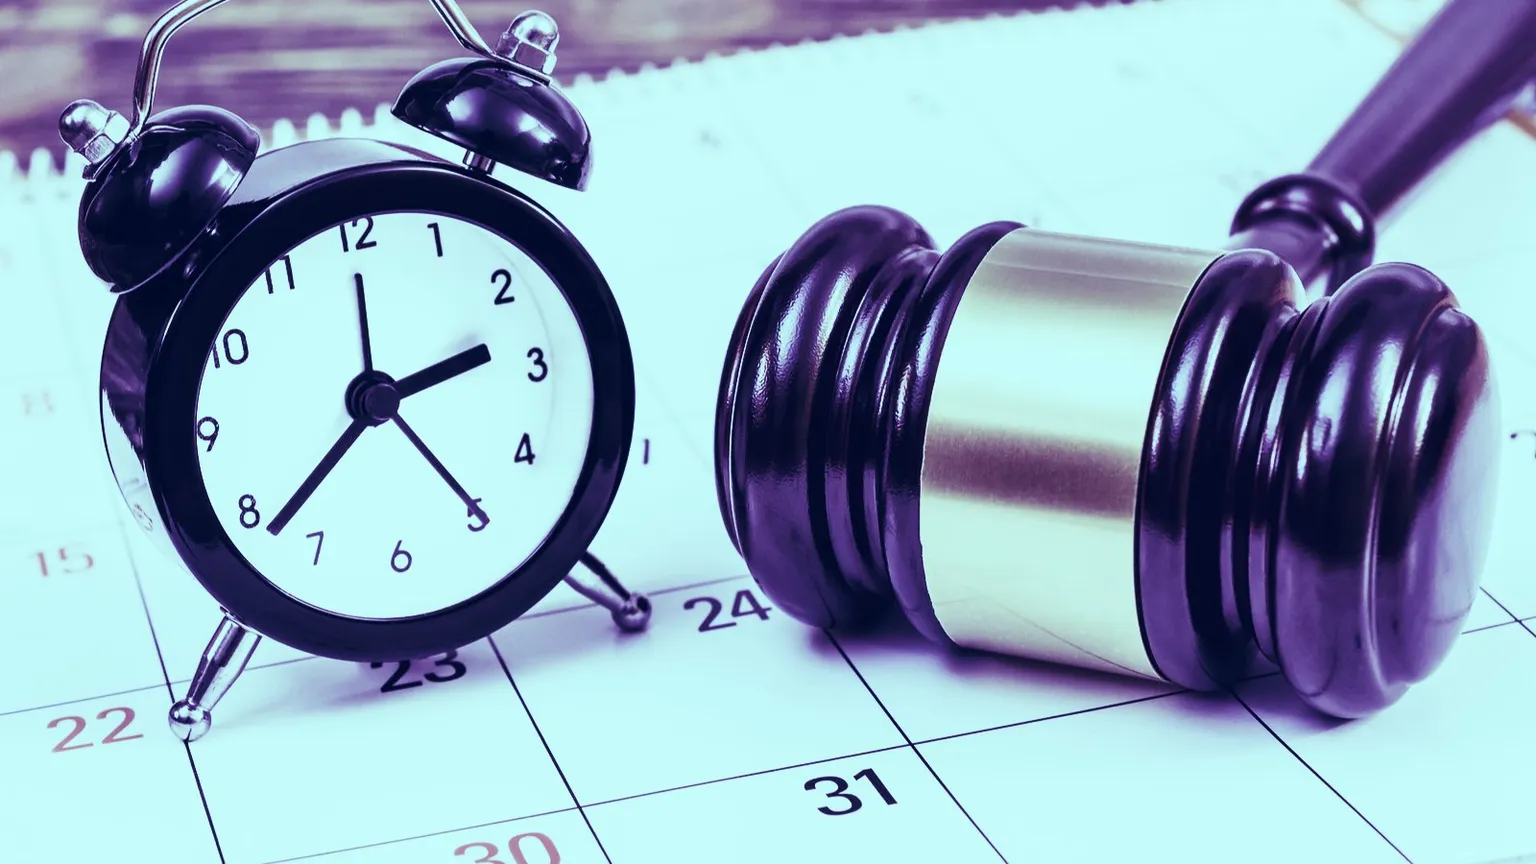 Judge's gavel with clock and calendar on the table. Image: Shutterstock